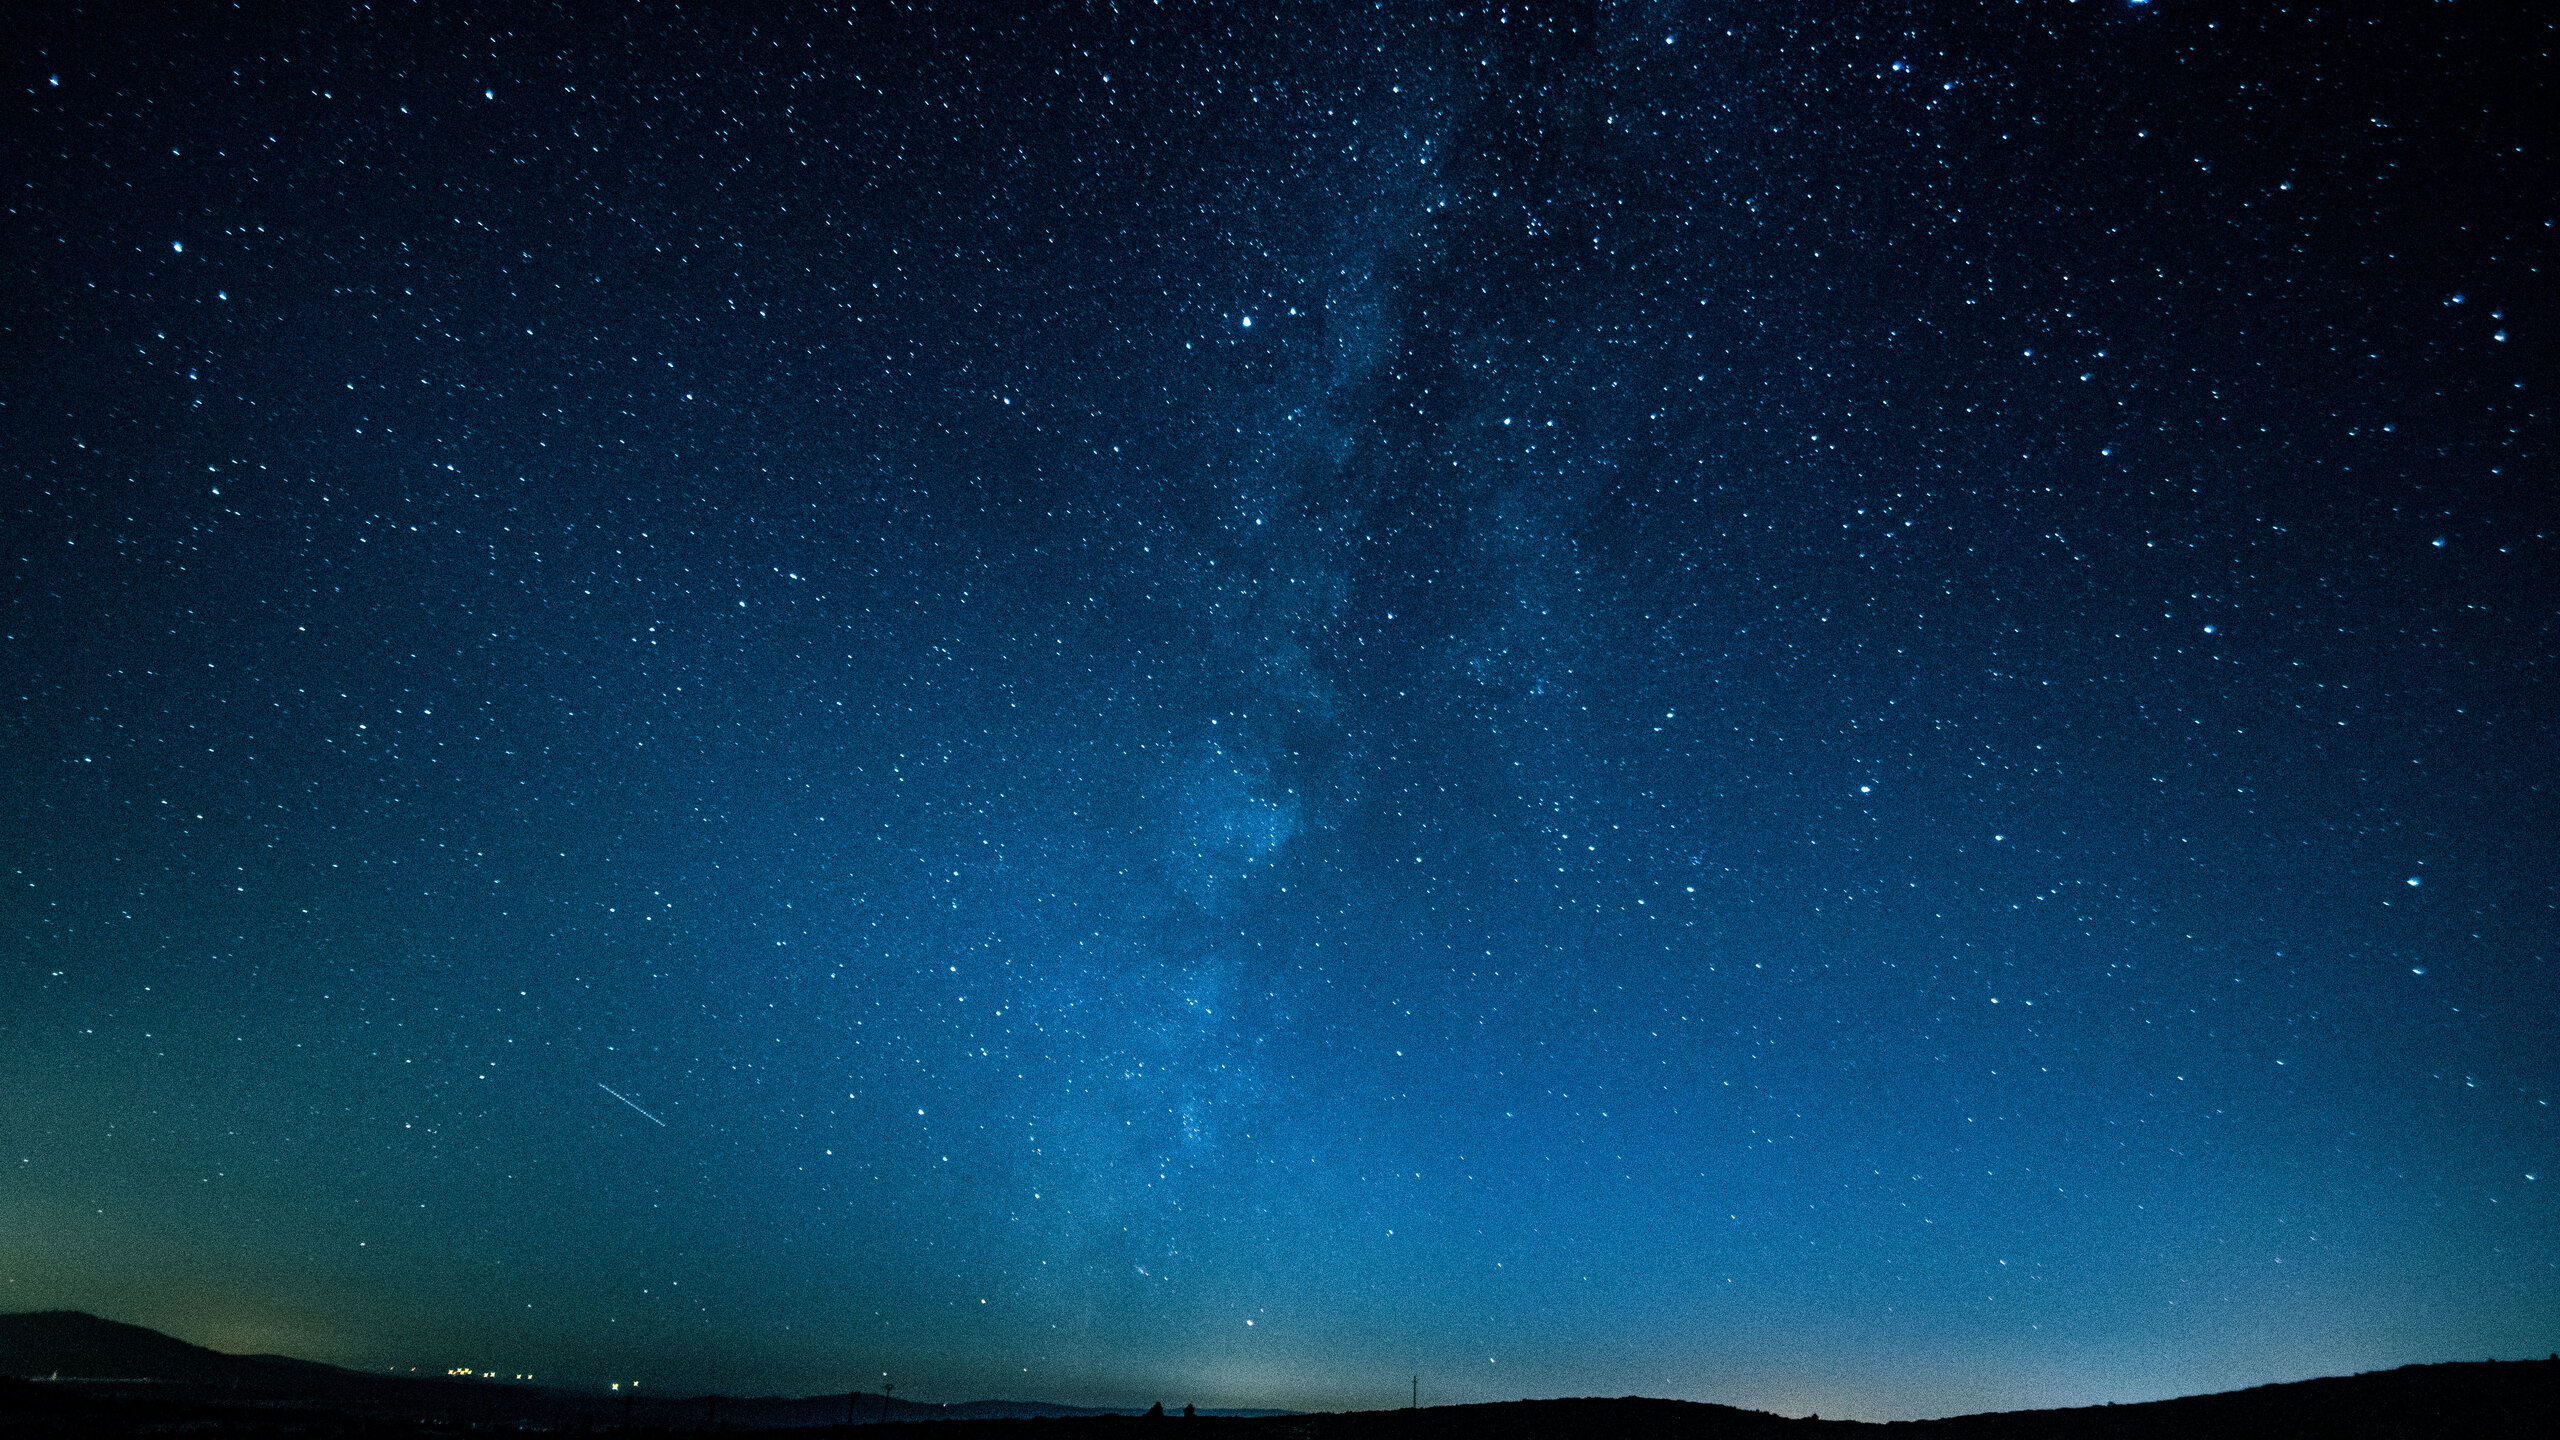 2560x1440 Starry Sky Wallpaper Clearance, 69% OFF